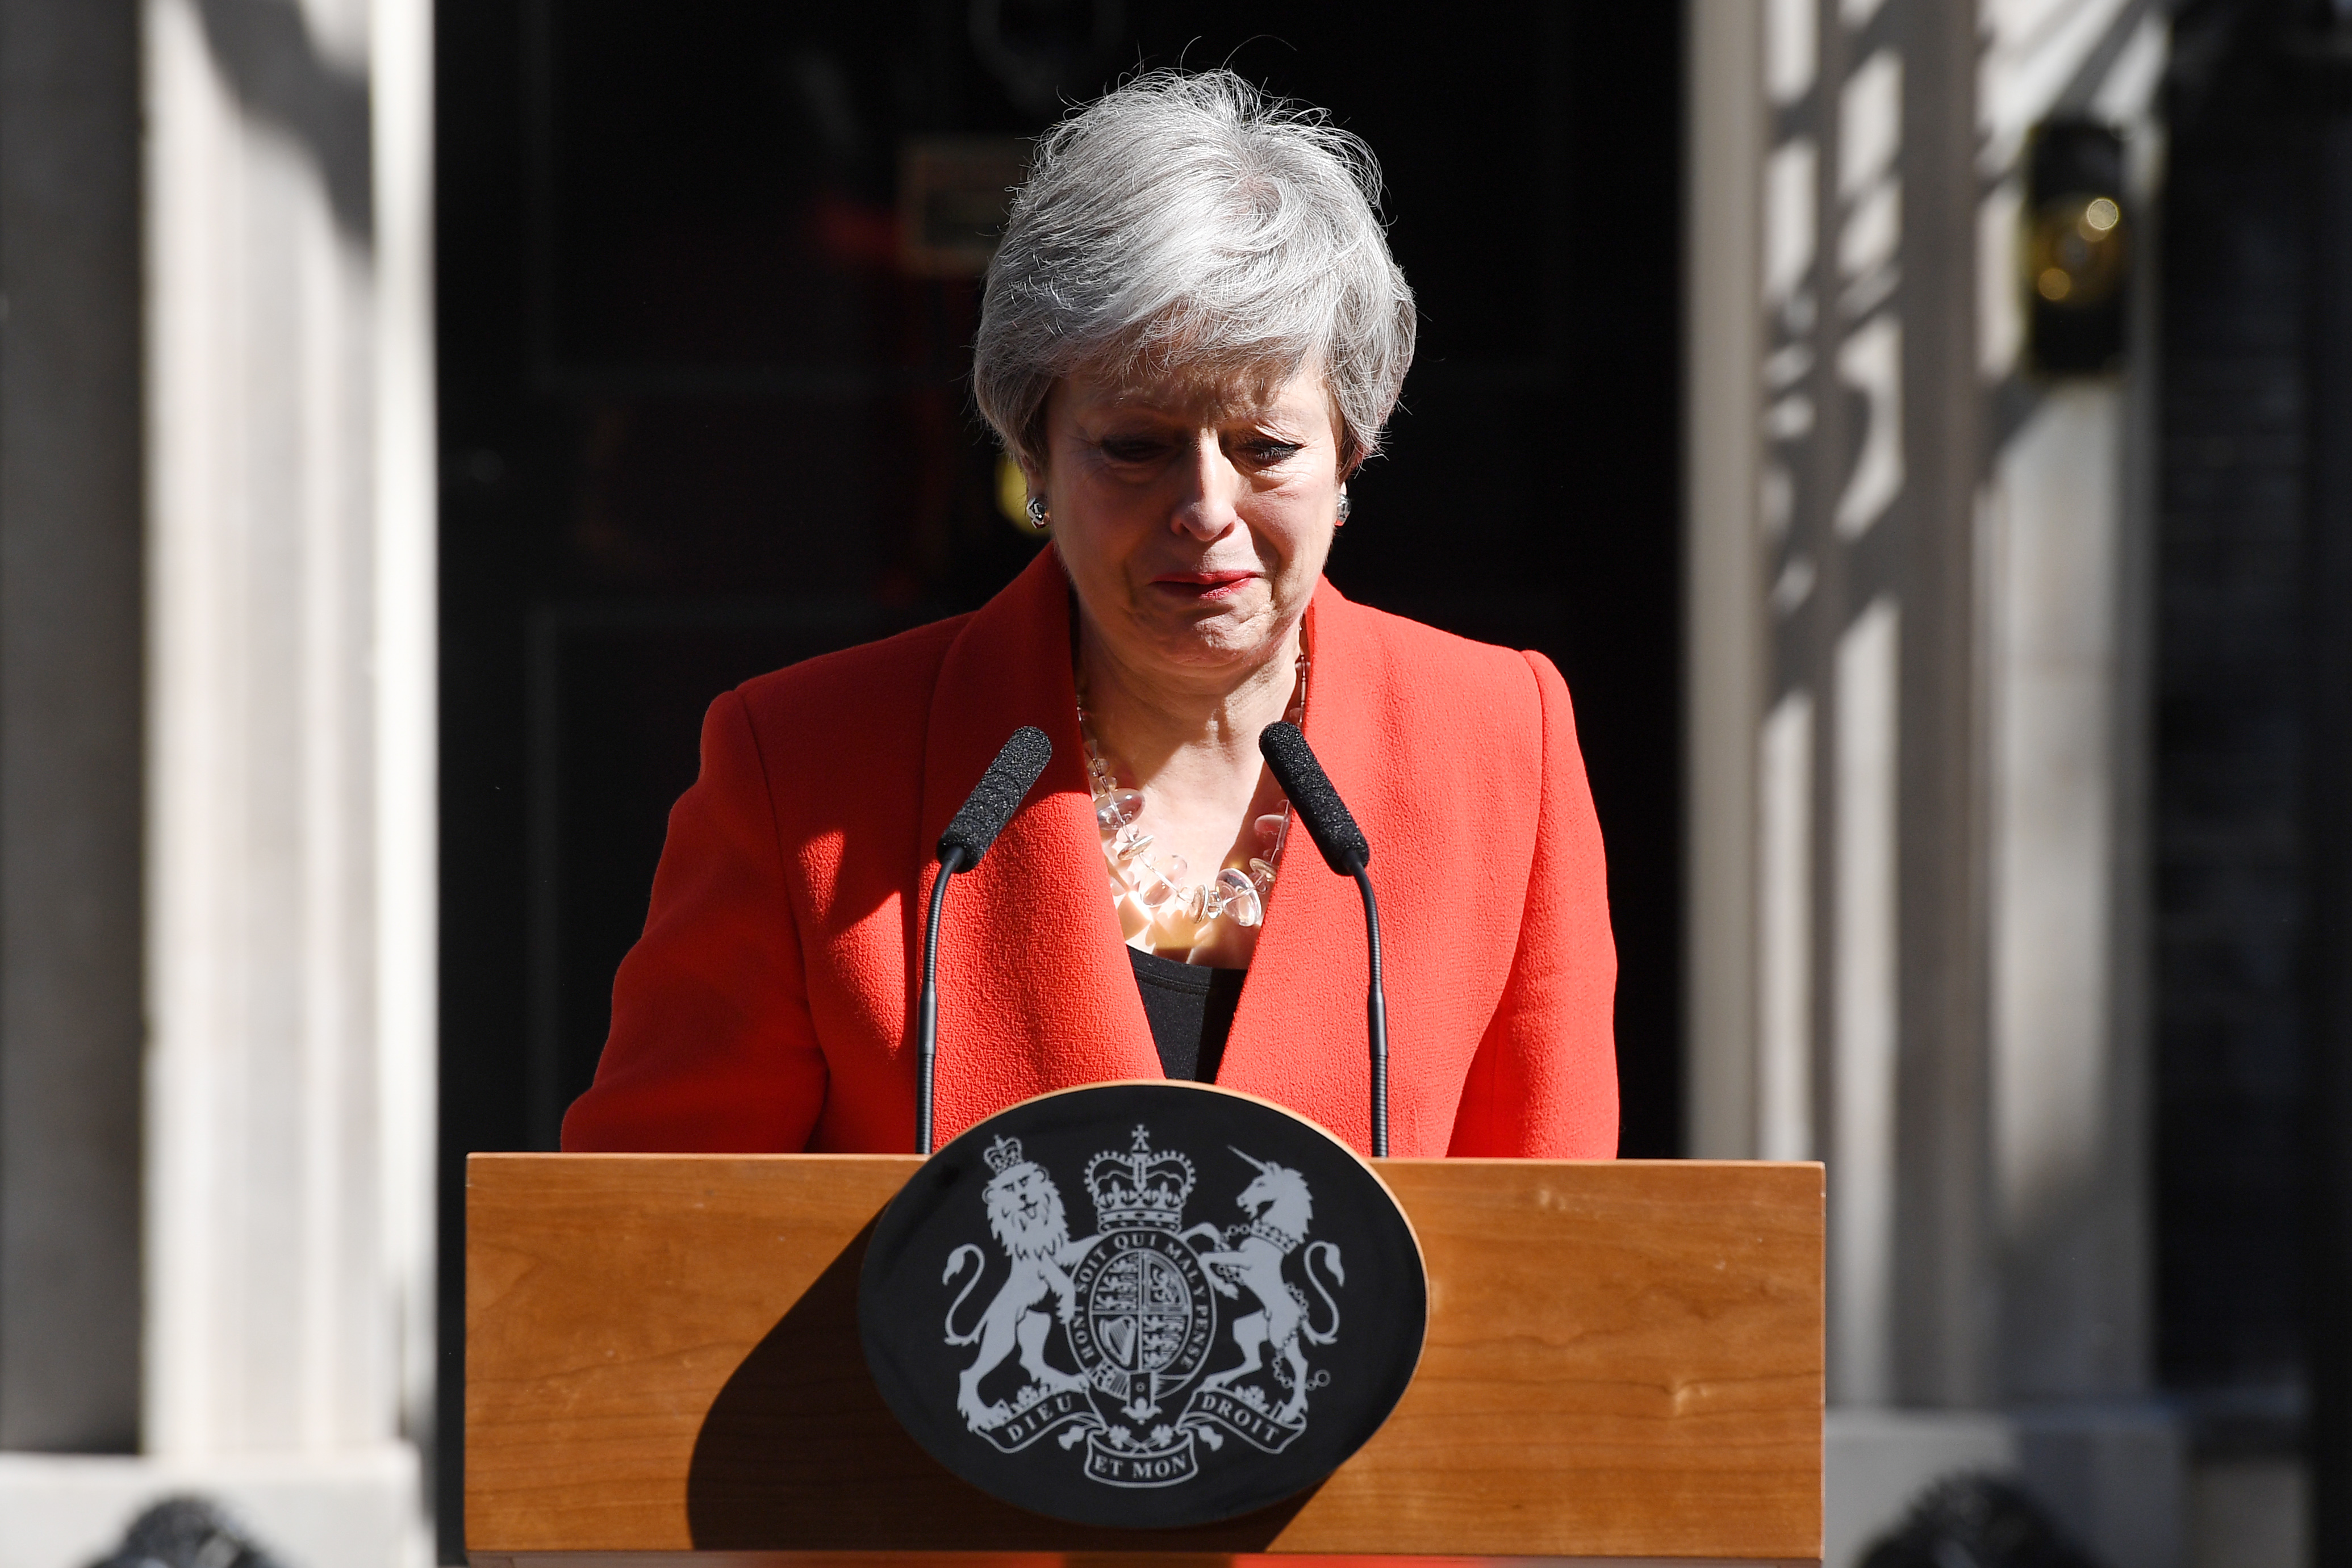 Prime Minister Theresa May makes a statement outside 10 Downing Street on May 24, 2019 in London, England. The prime minister has announced that she will resign on Friday, June 7, 2019.